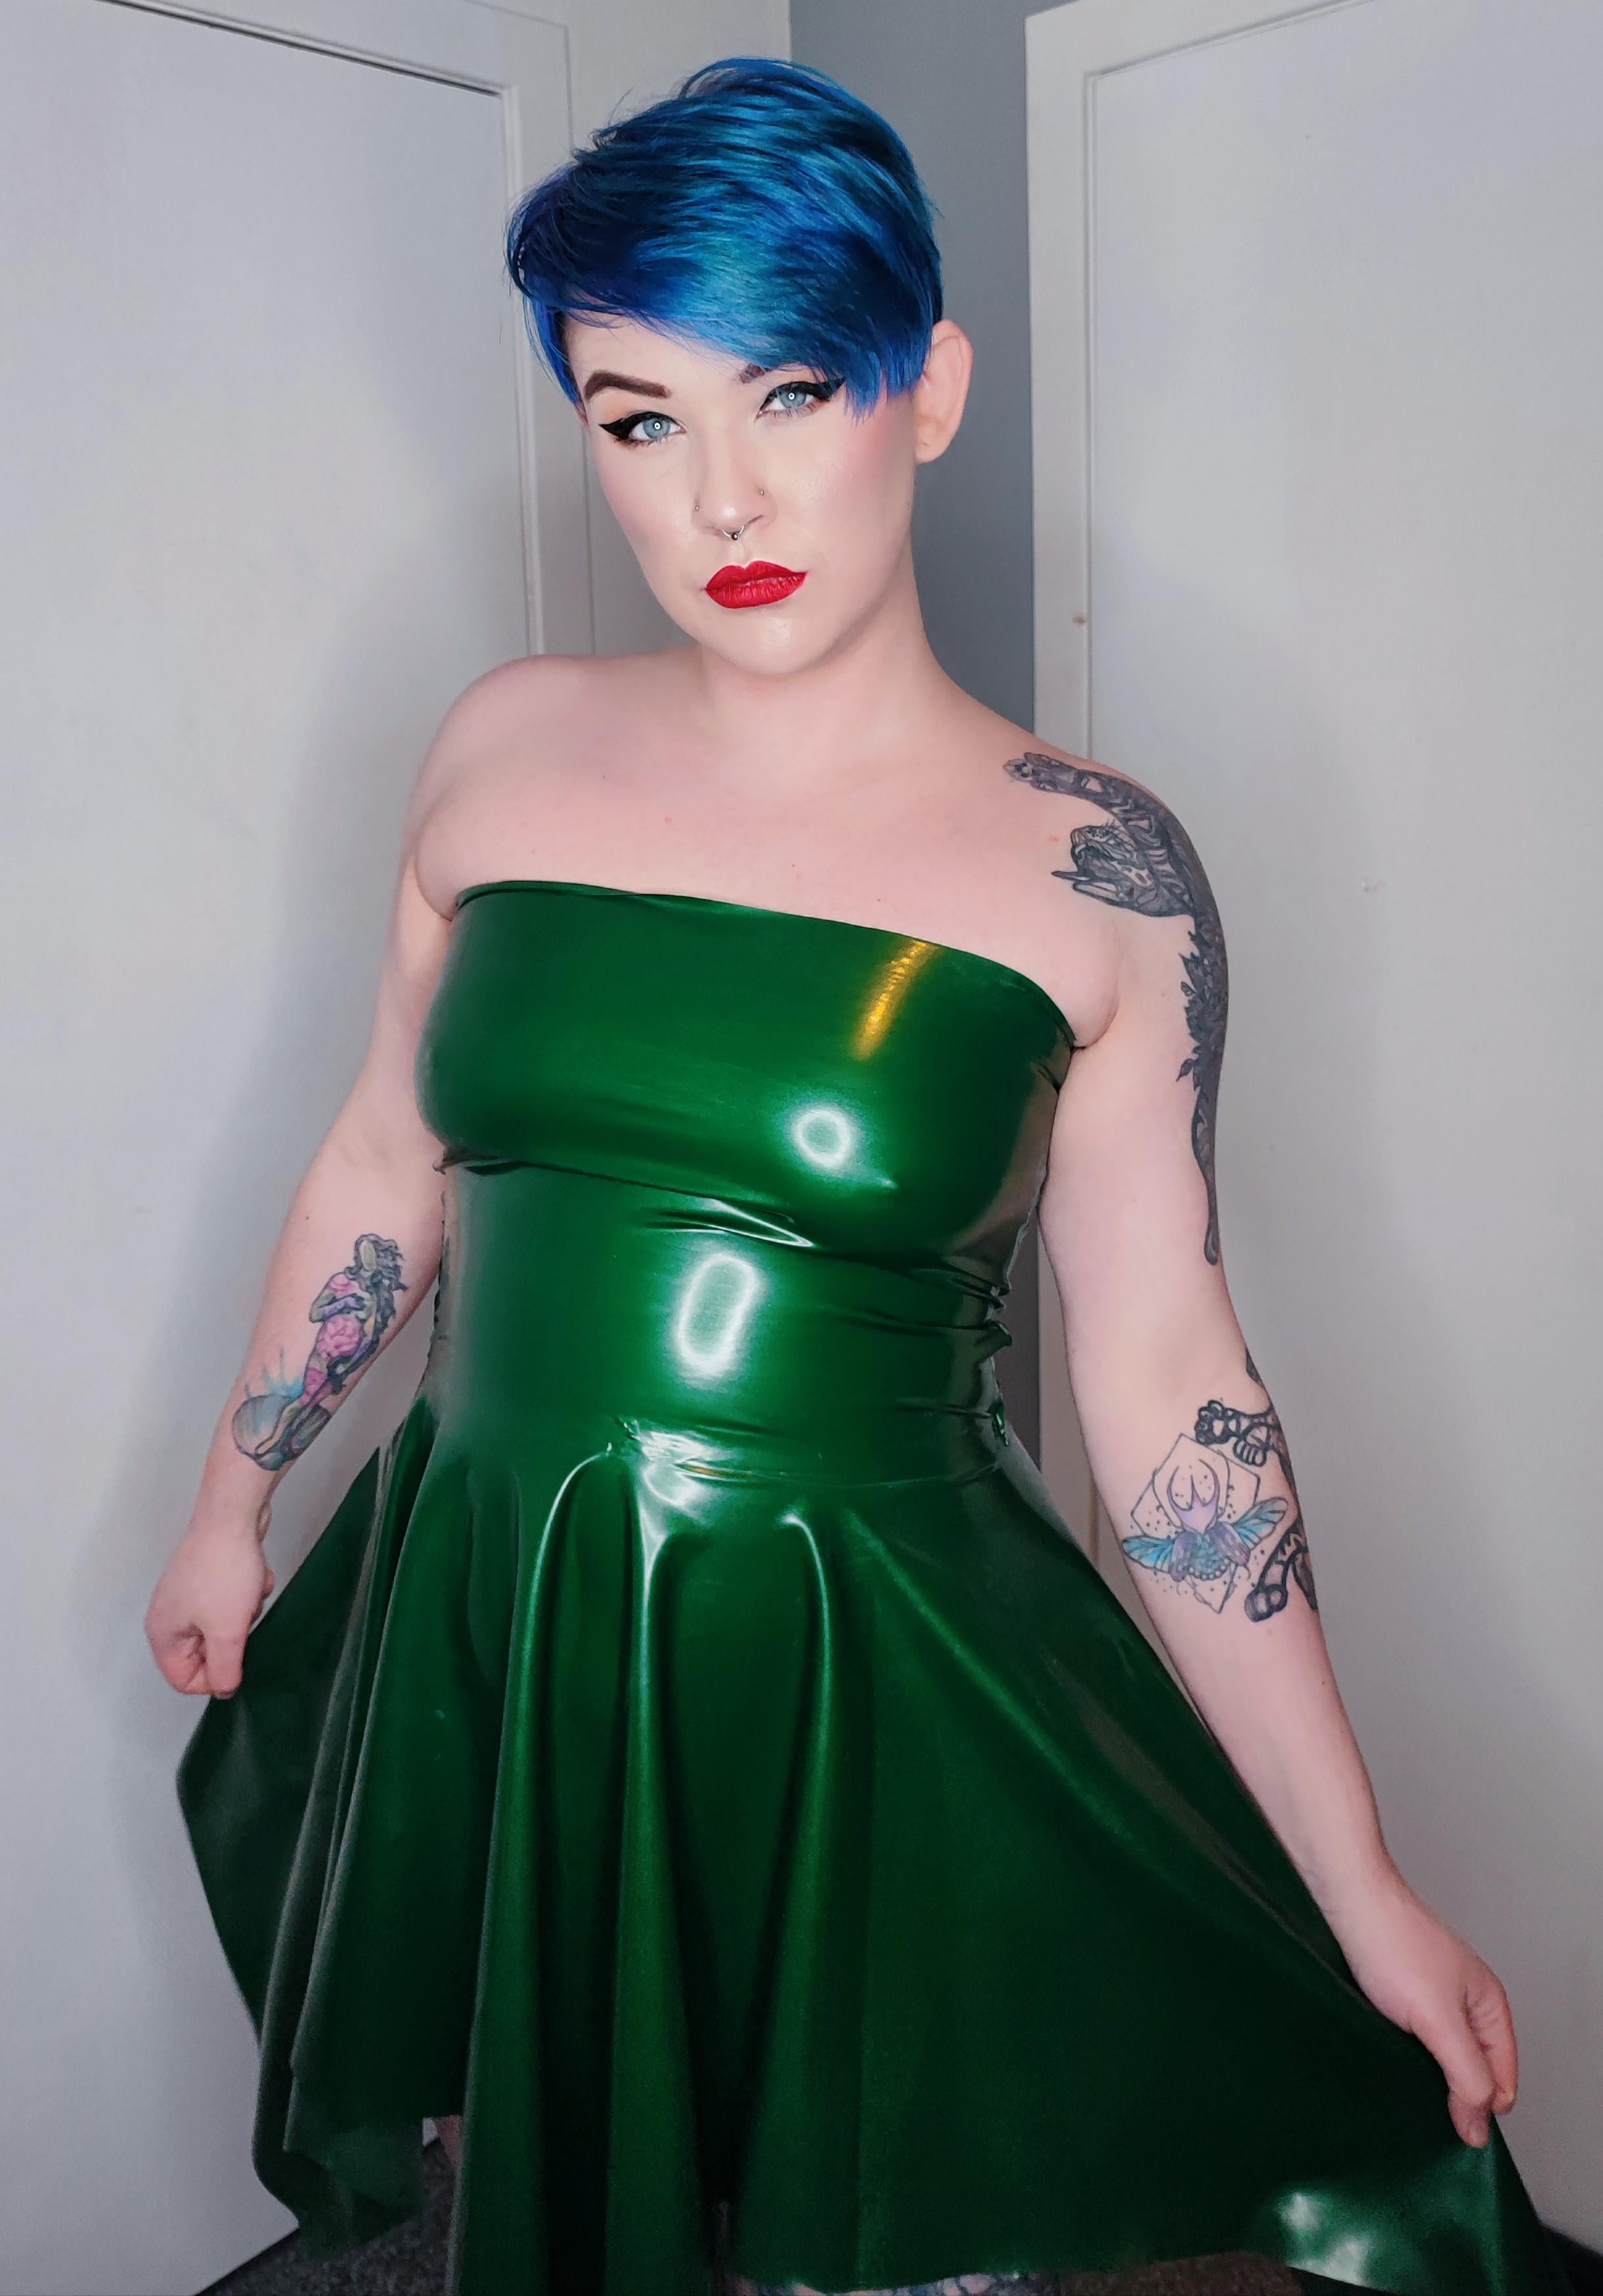 So I Made This Green Metallic Latex Dress Thoughts?